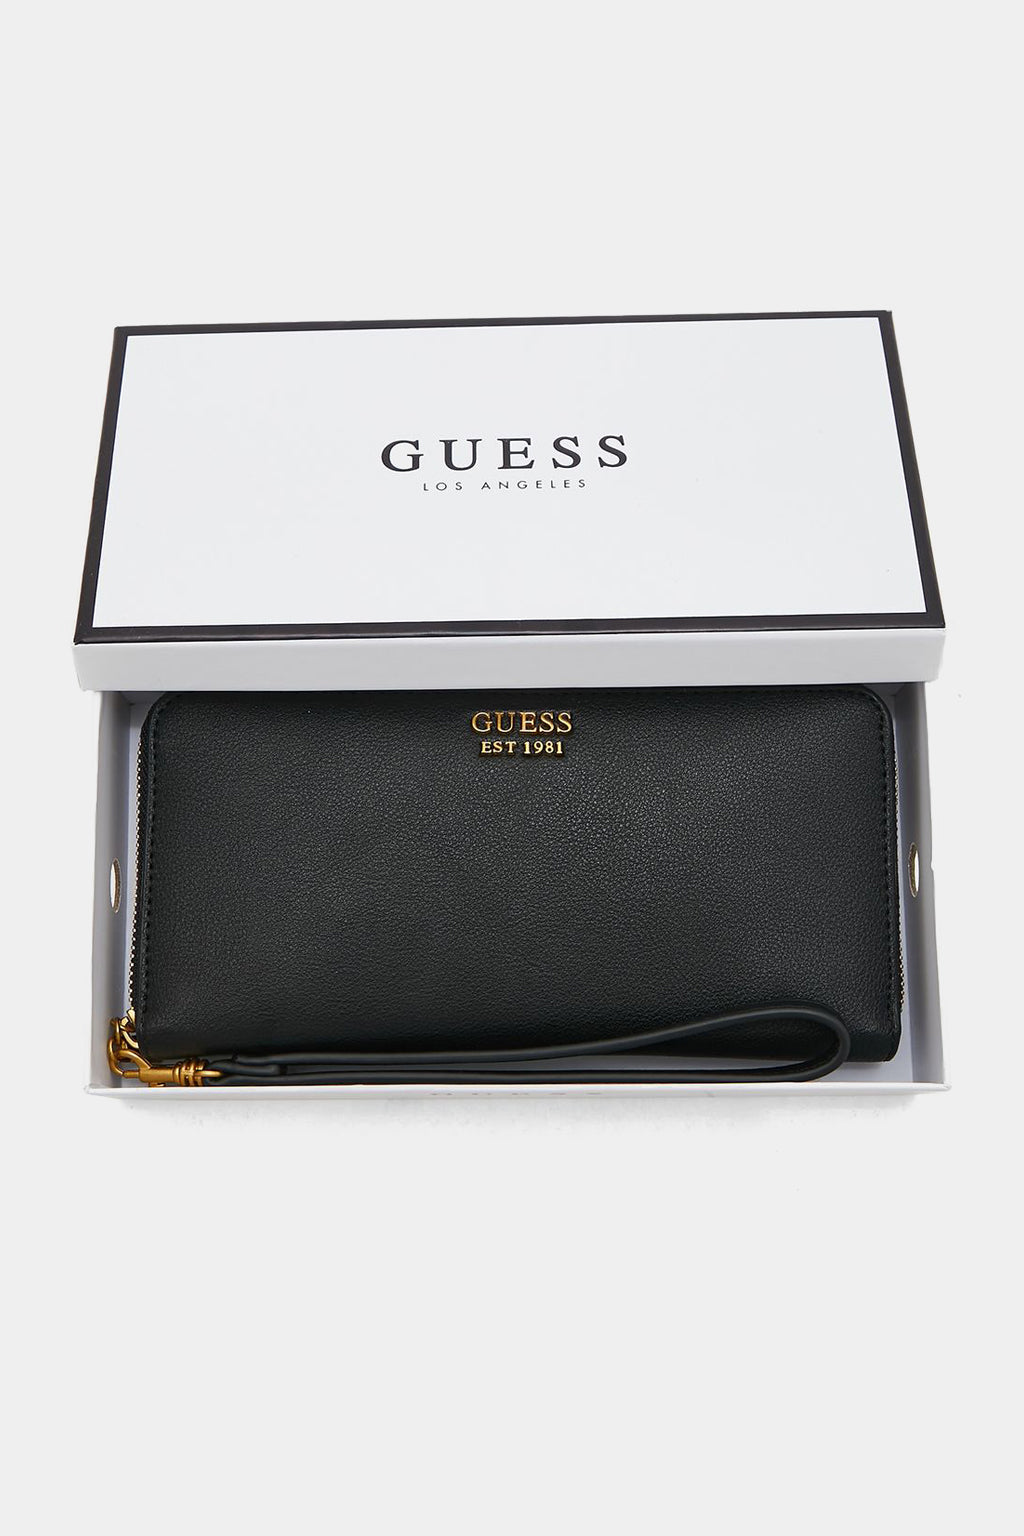 Guess Enisa SLG Large Zip Around Wallet